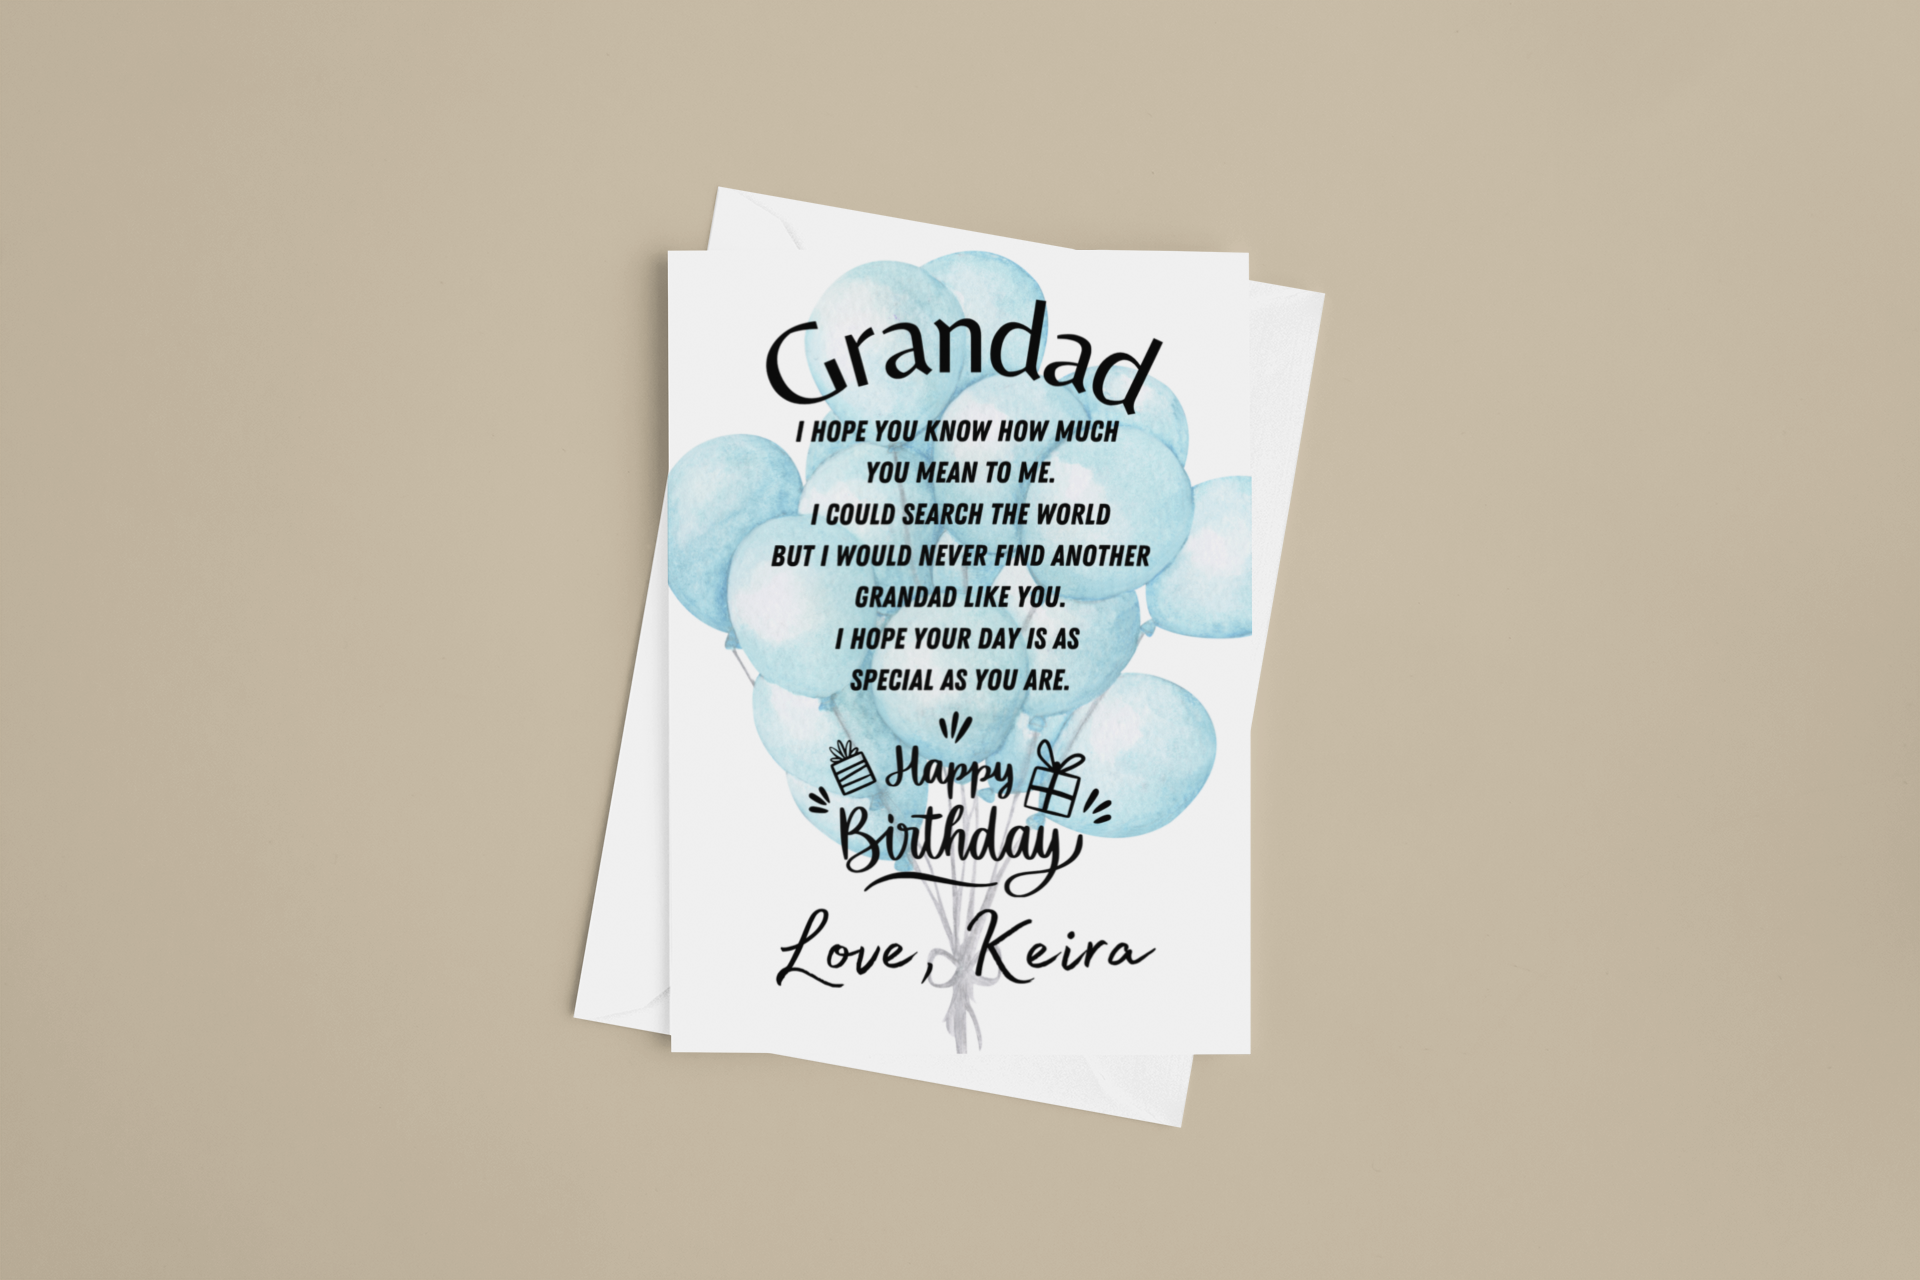 Personalised birthday card for grandad. It has on the front Grandad I hope you know how much you mean to me, I could search the world but I would never find another grandad like you. I hope your day is as special as you are. Happy birthday love (your name)